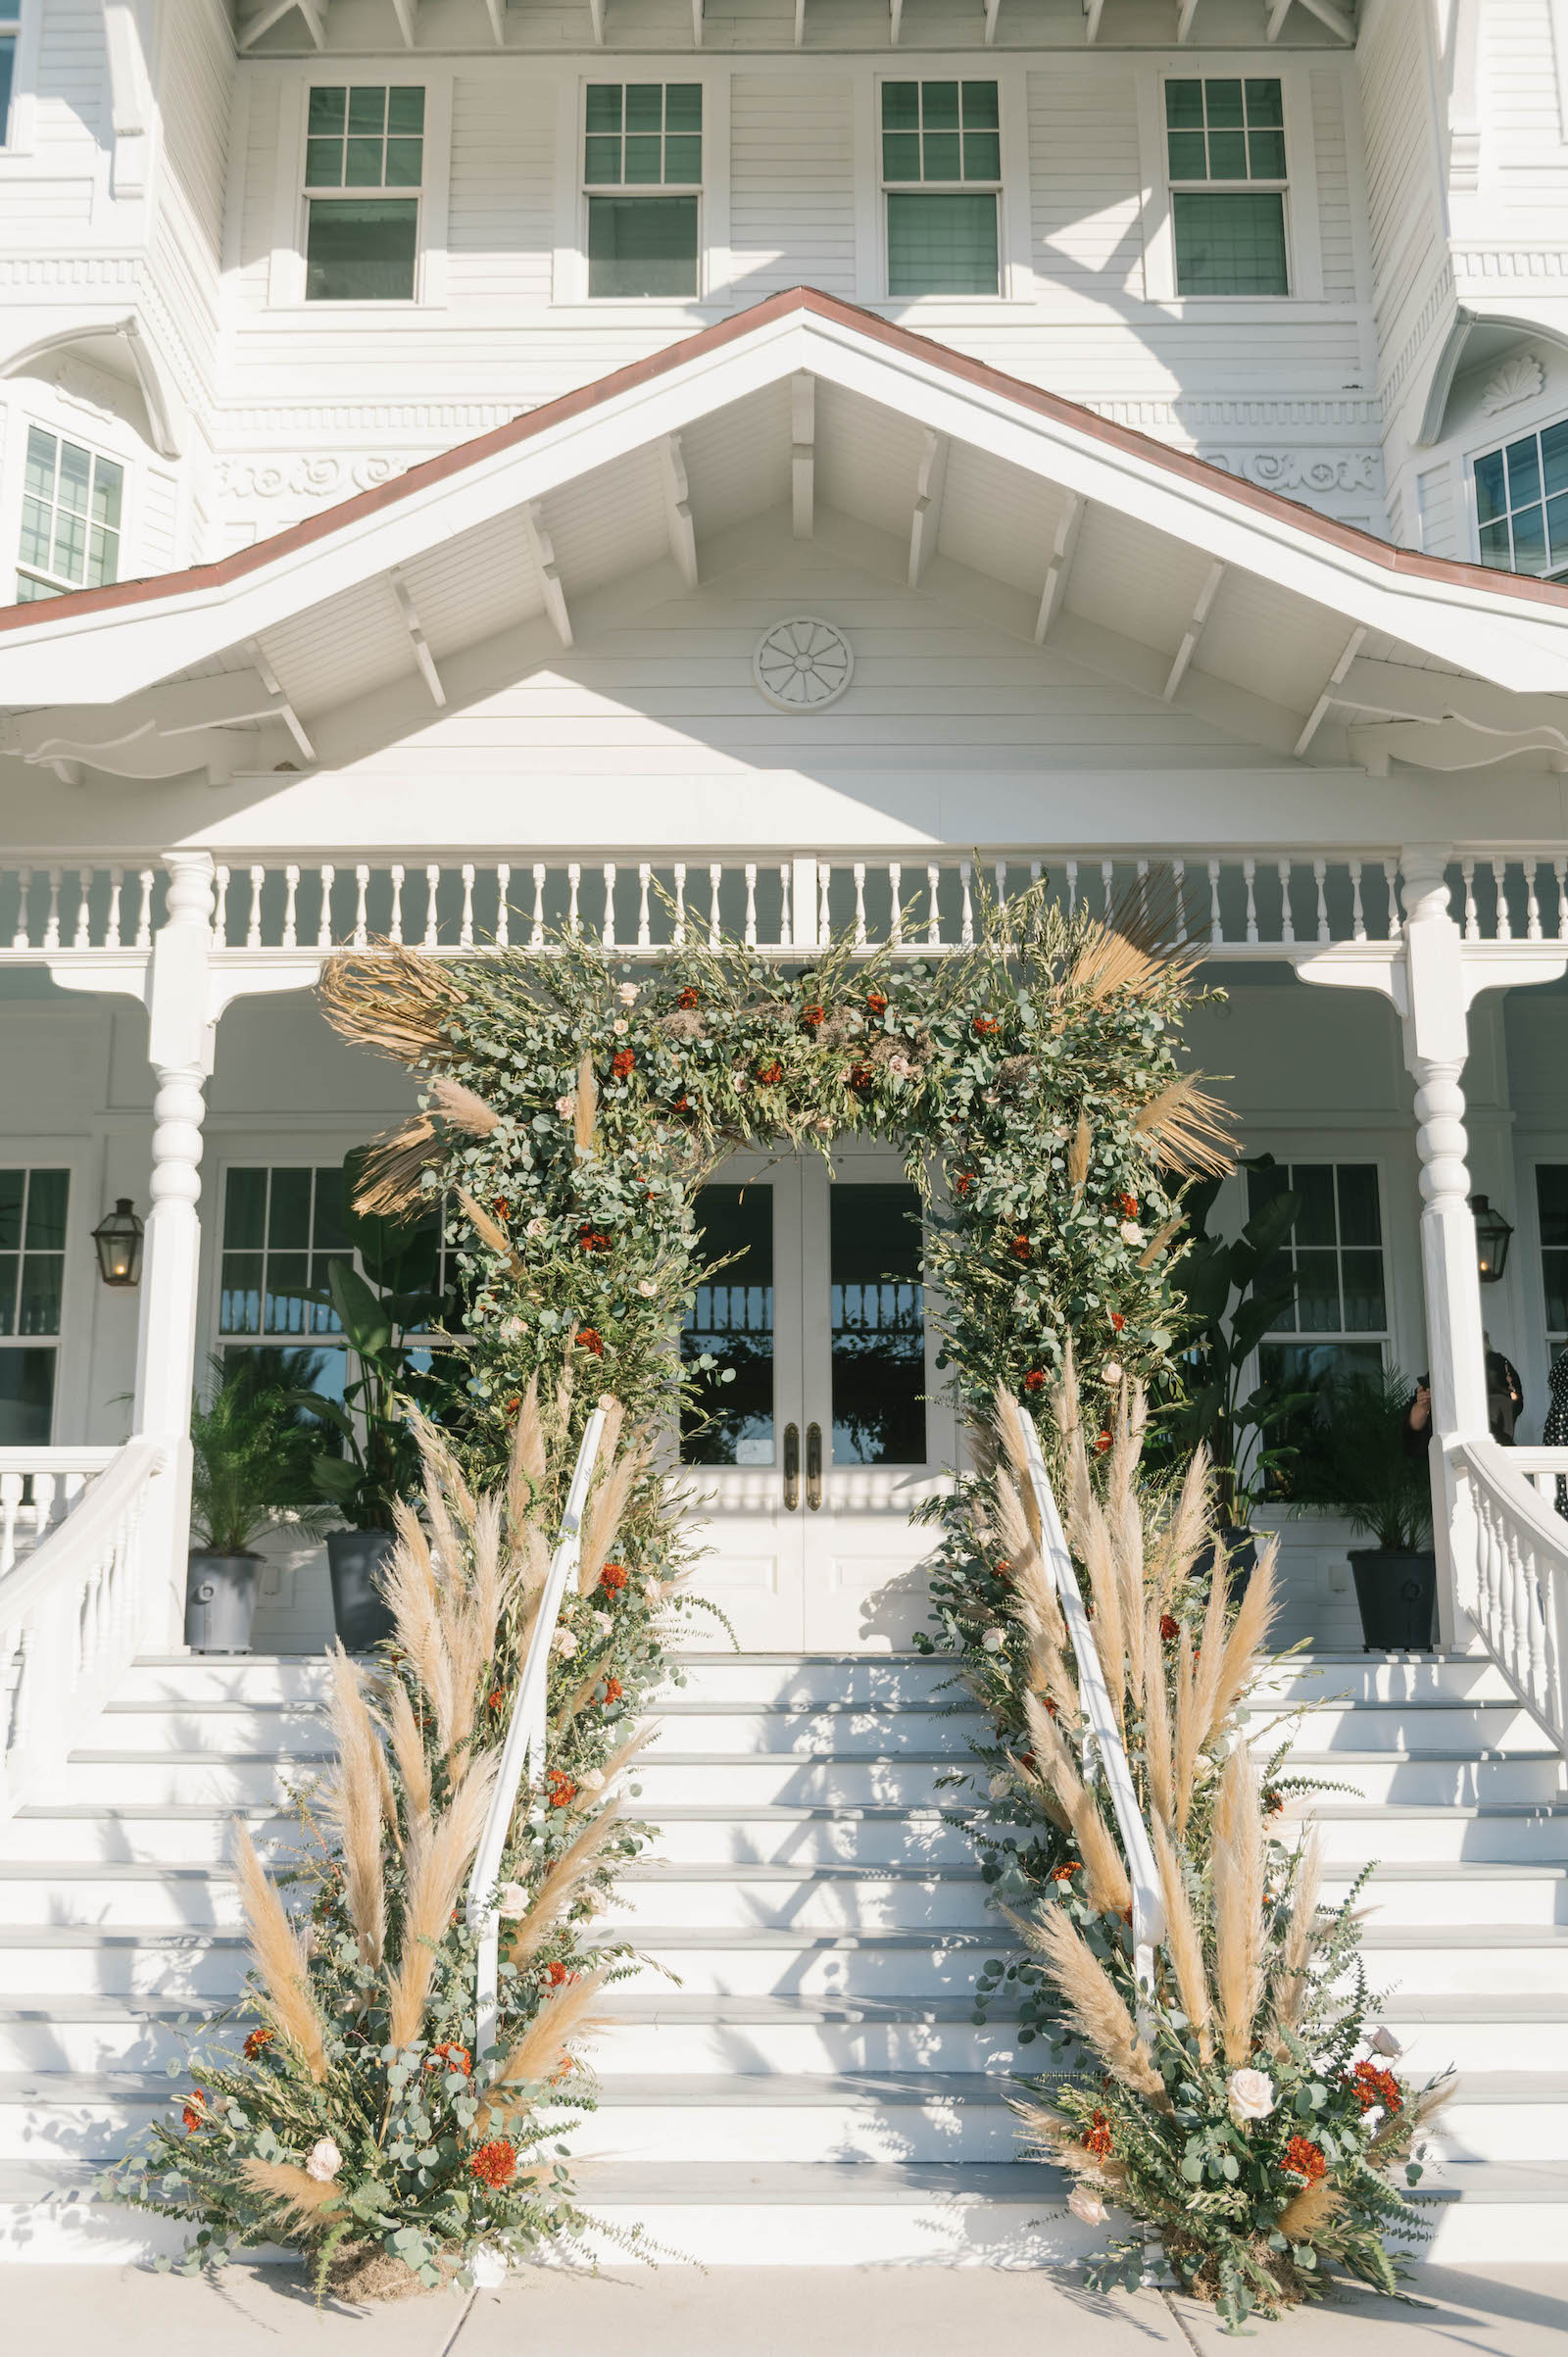 Boho Garden Wedding Ceremony, Lush Greenery and Floral Arch with Pampas Grass Arrangements, String Lights | Tampa Bay Wedding Planner Parties A'la Carte | Florida Wedding Venue Belleview Inn